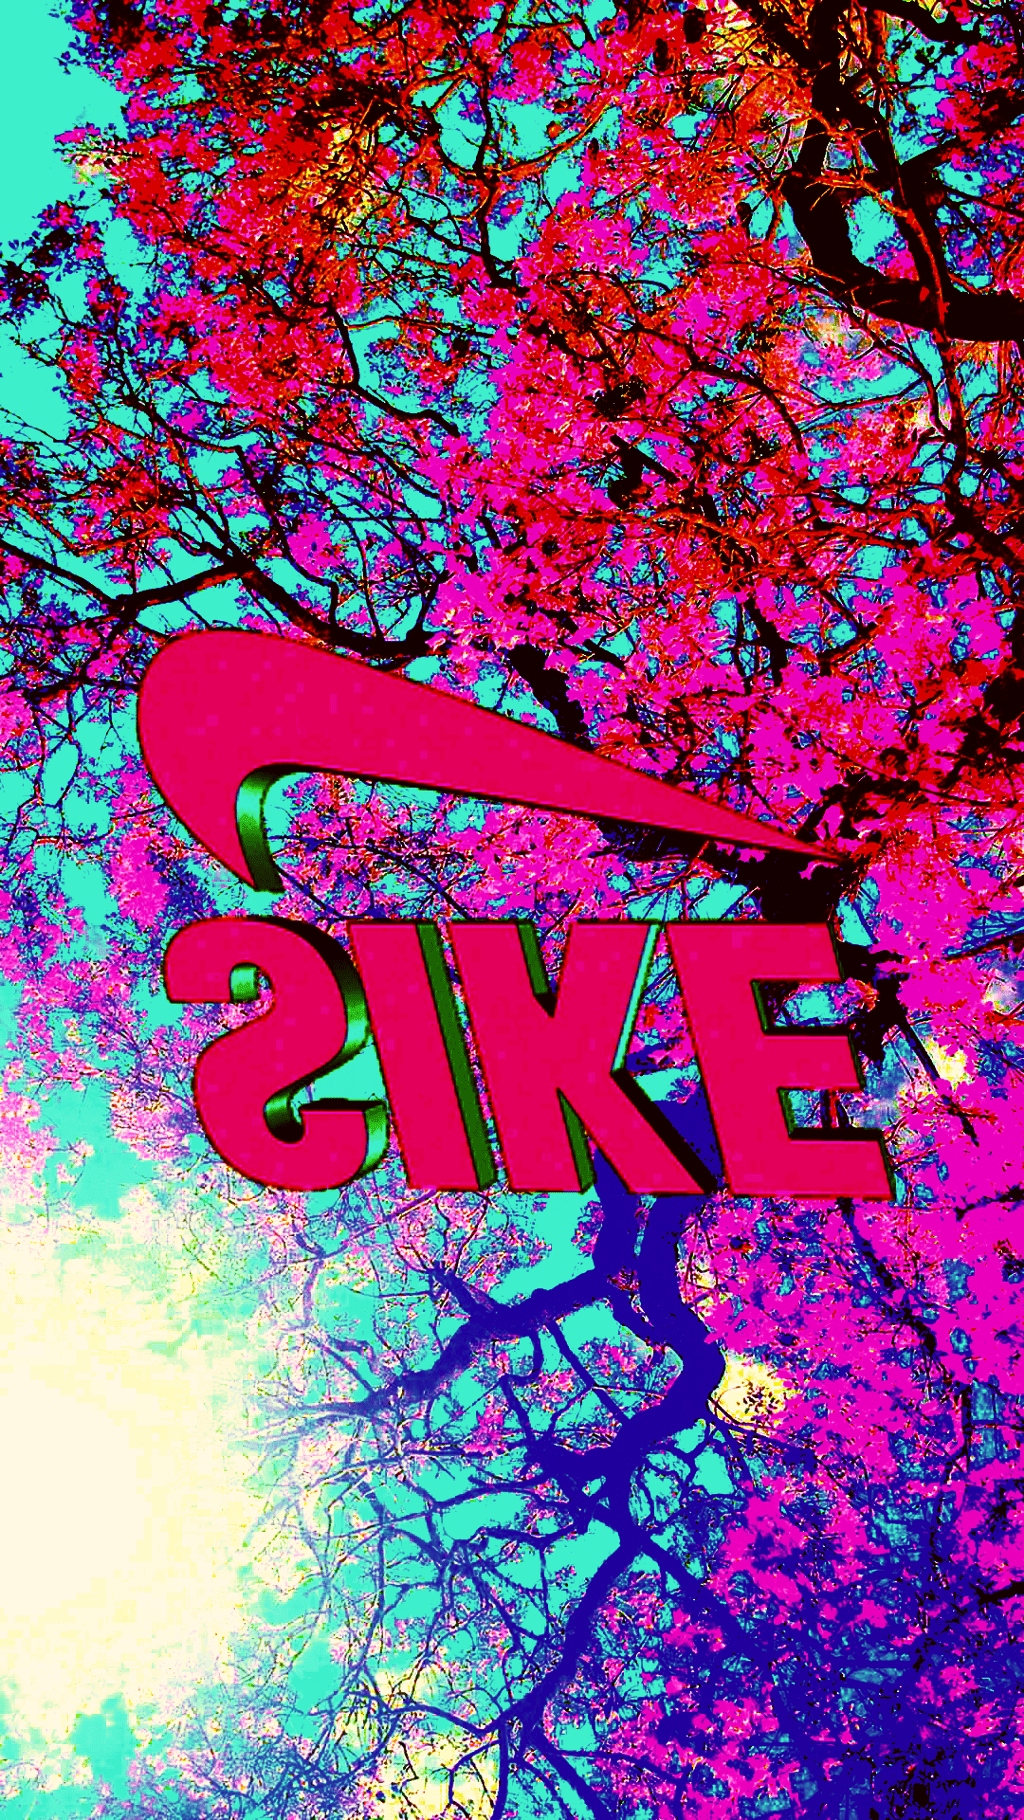 A colorful poster with the nike logo on it - Vaporwave